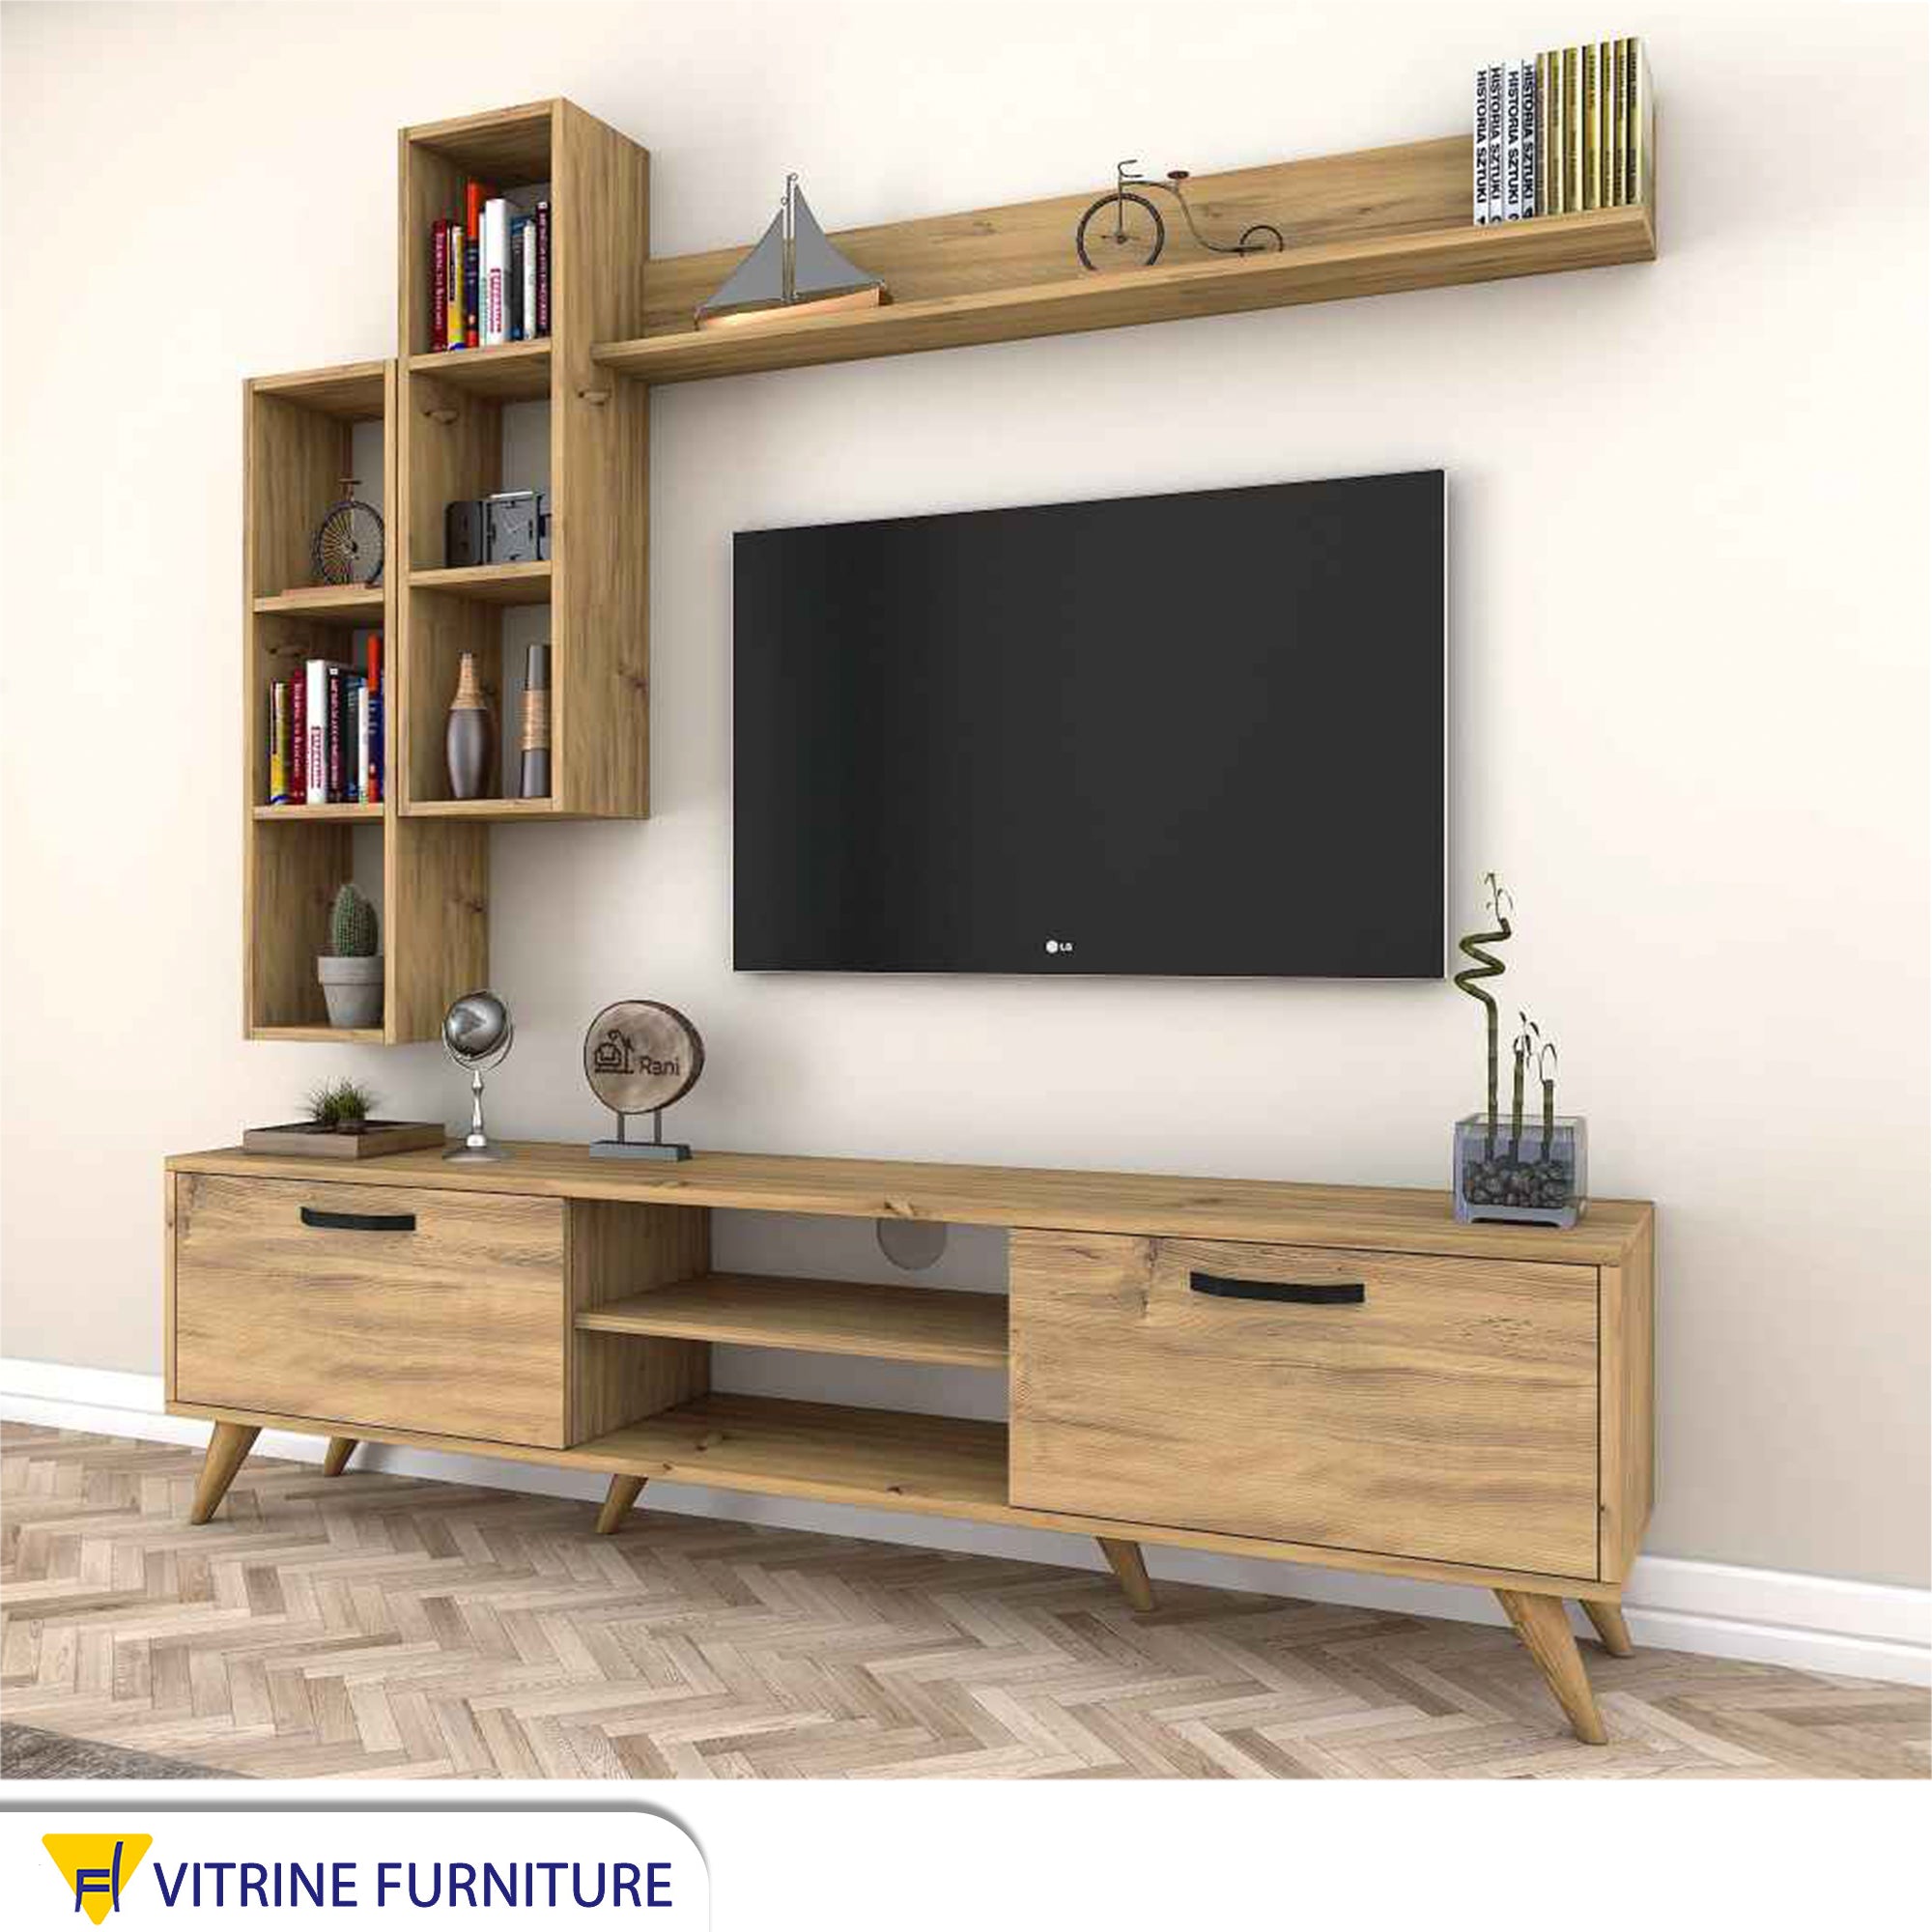 TV table in natural wood color